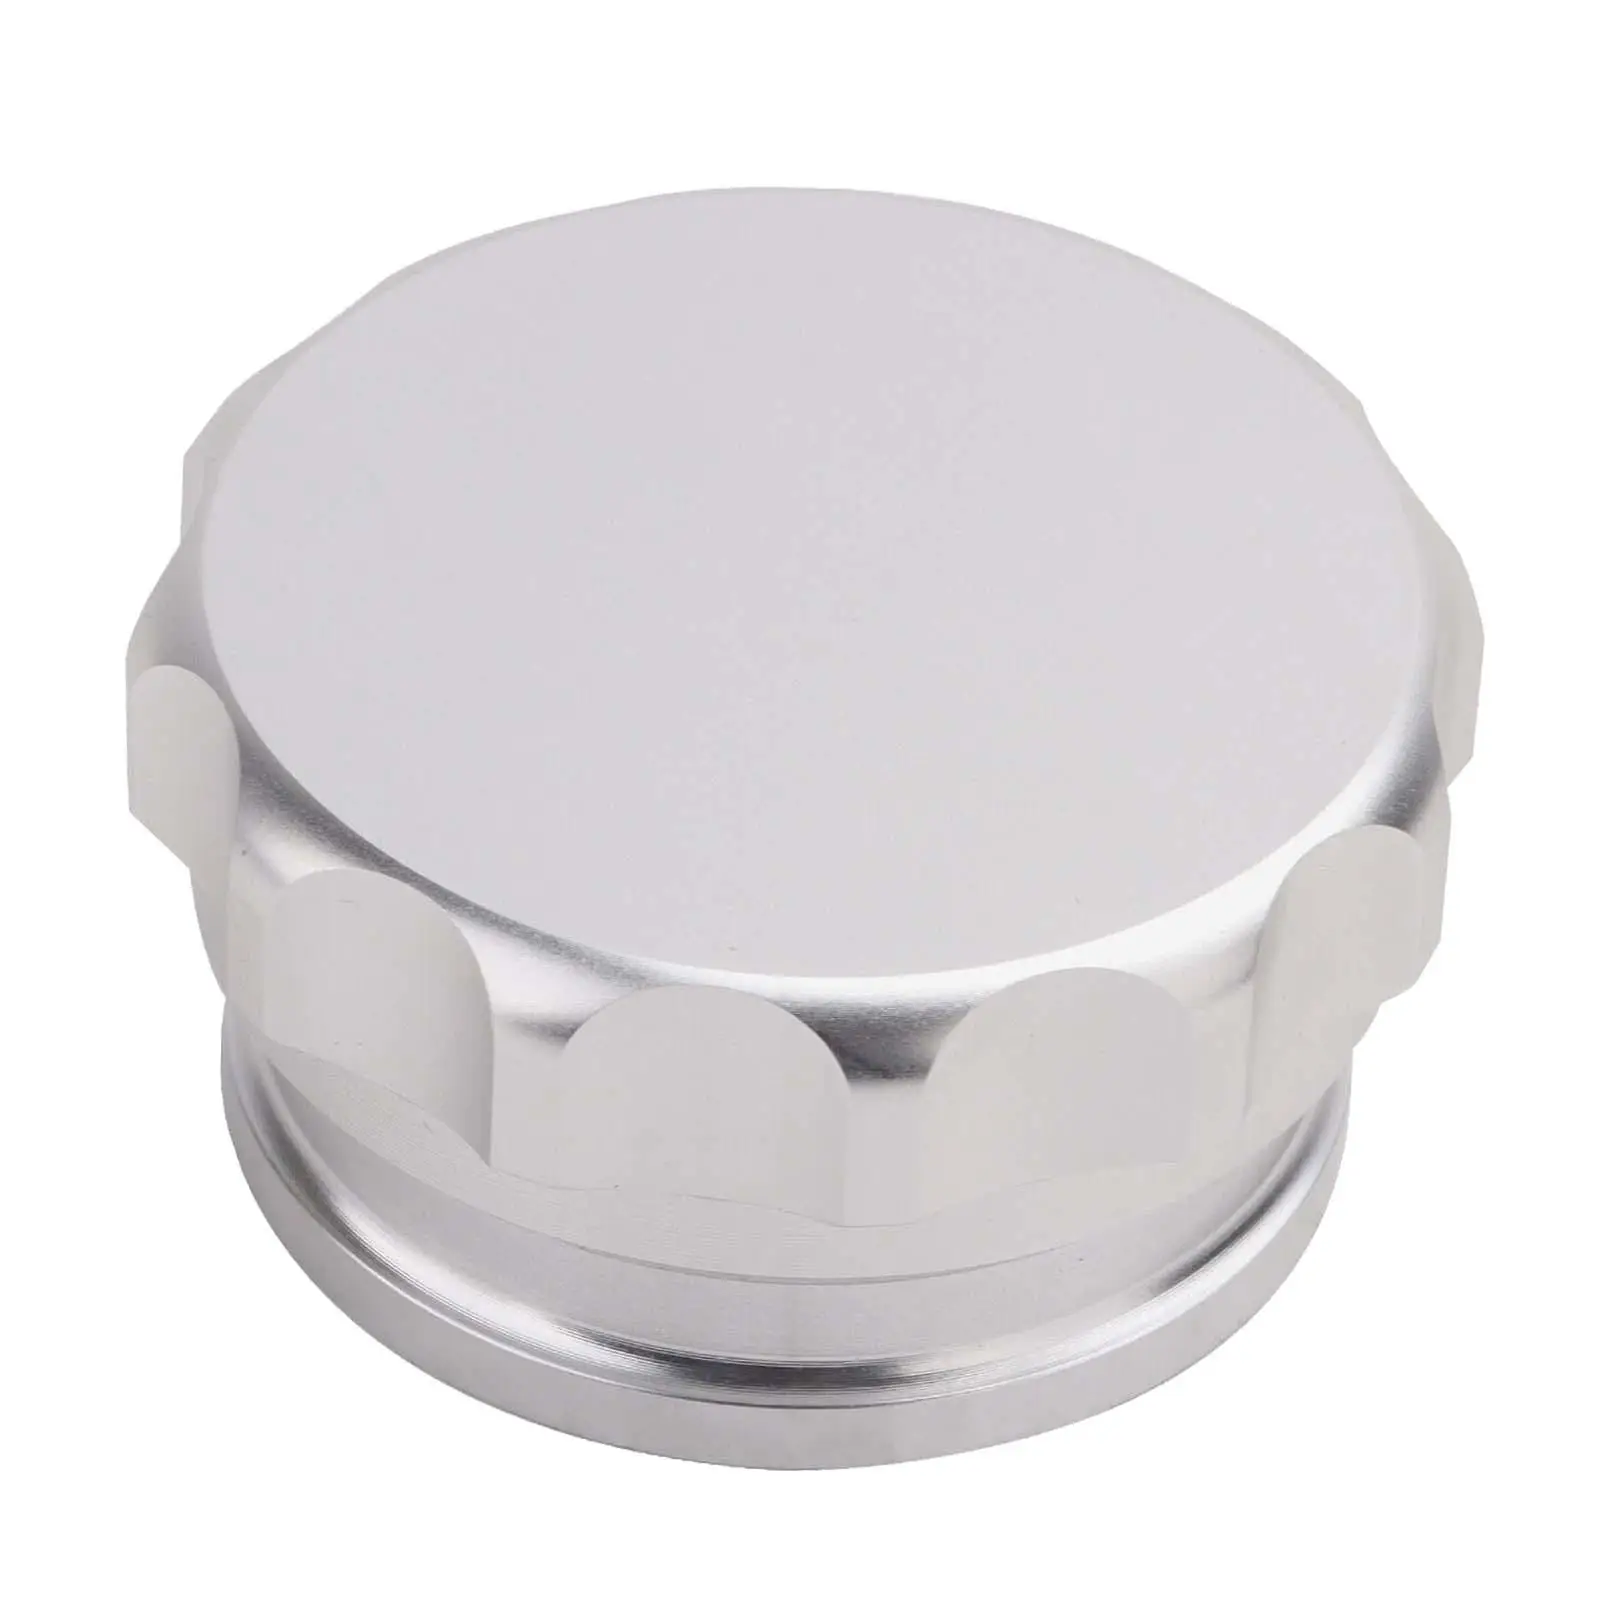 Weld on Filler Cap High Quality Accessories Durable Sturdy Easy to Install